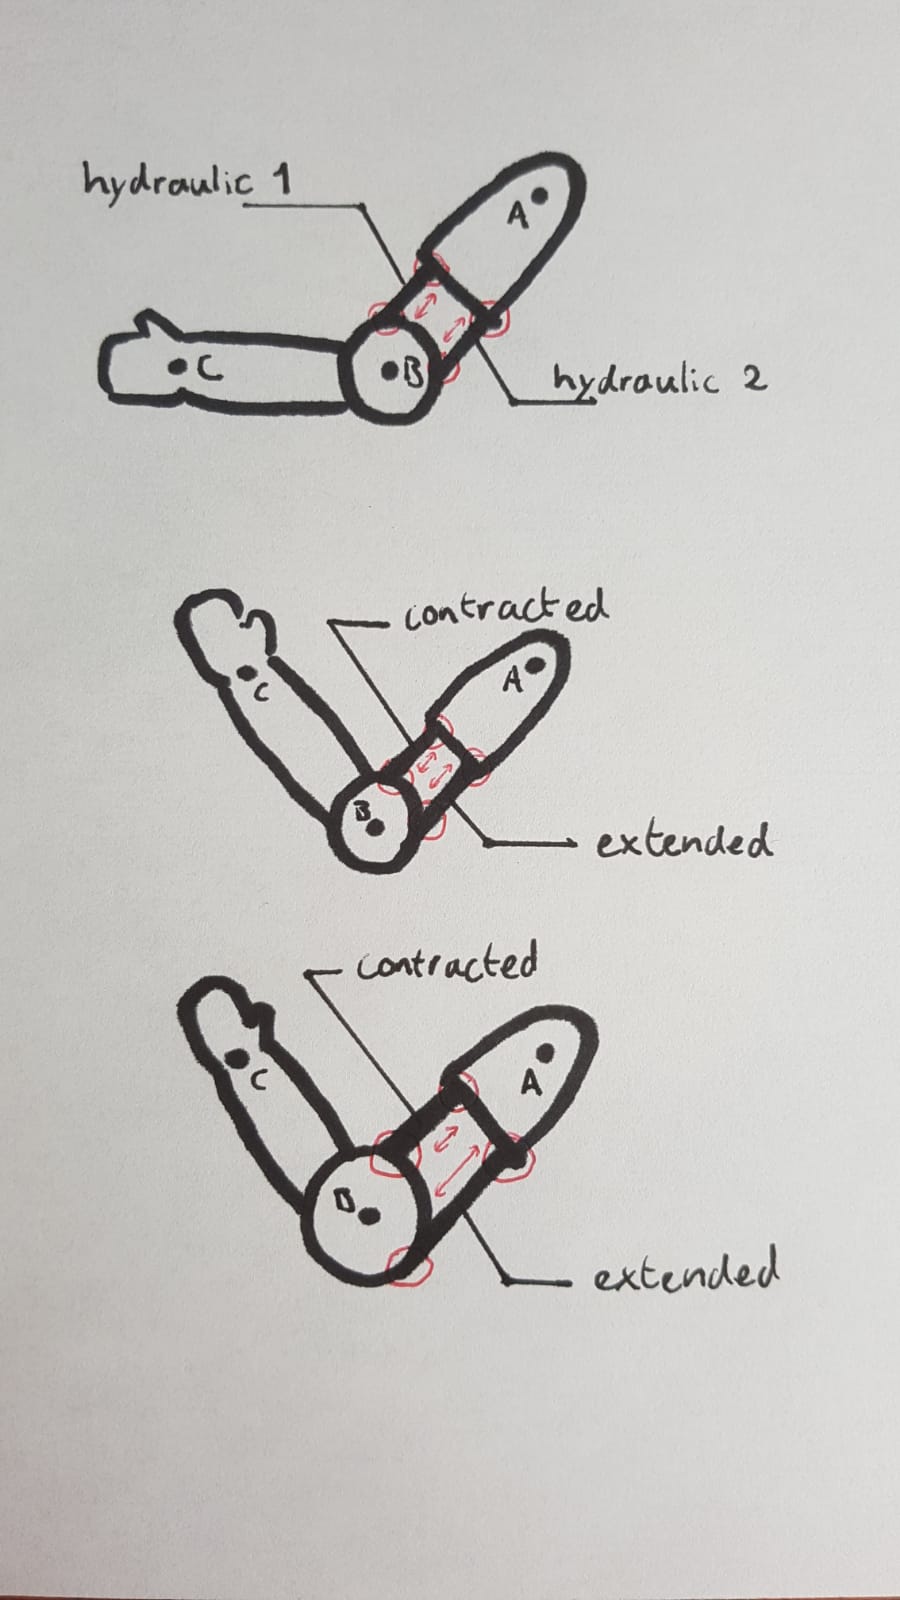 Forces on elbow joint